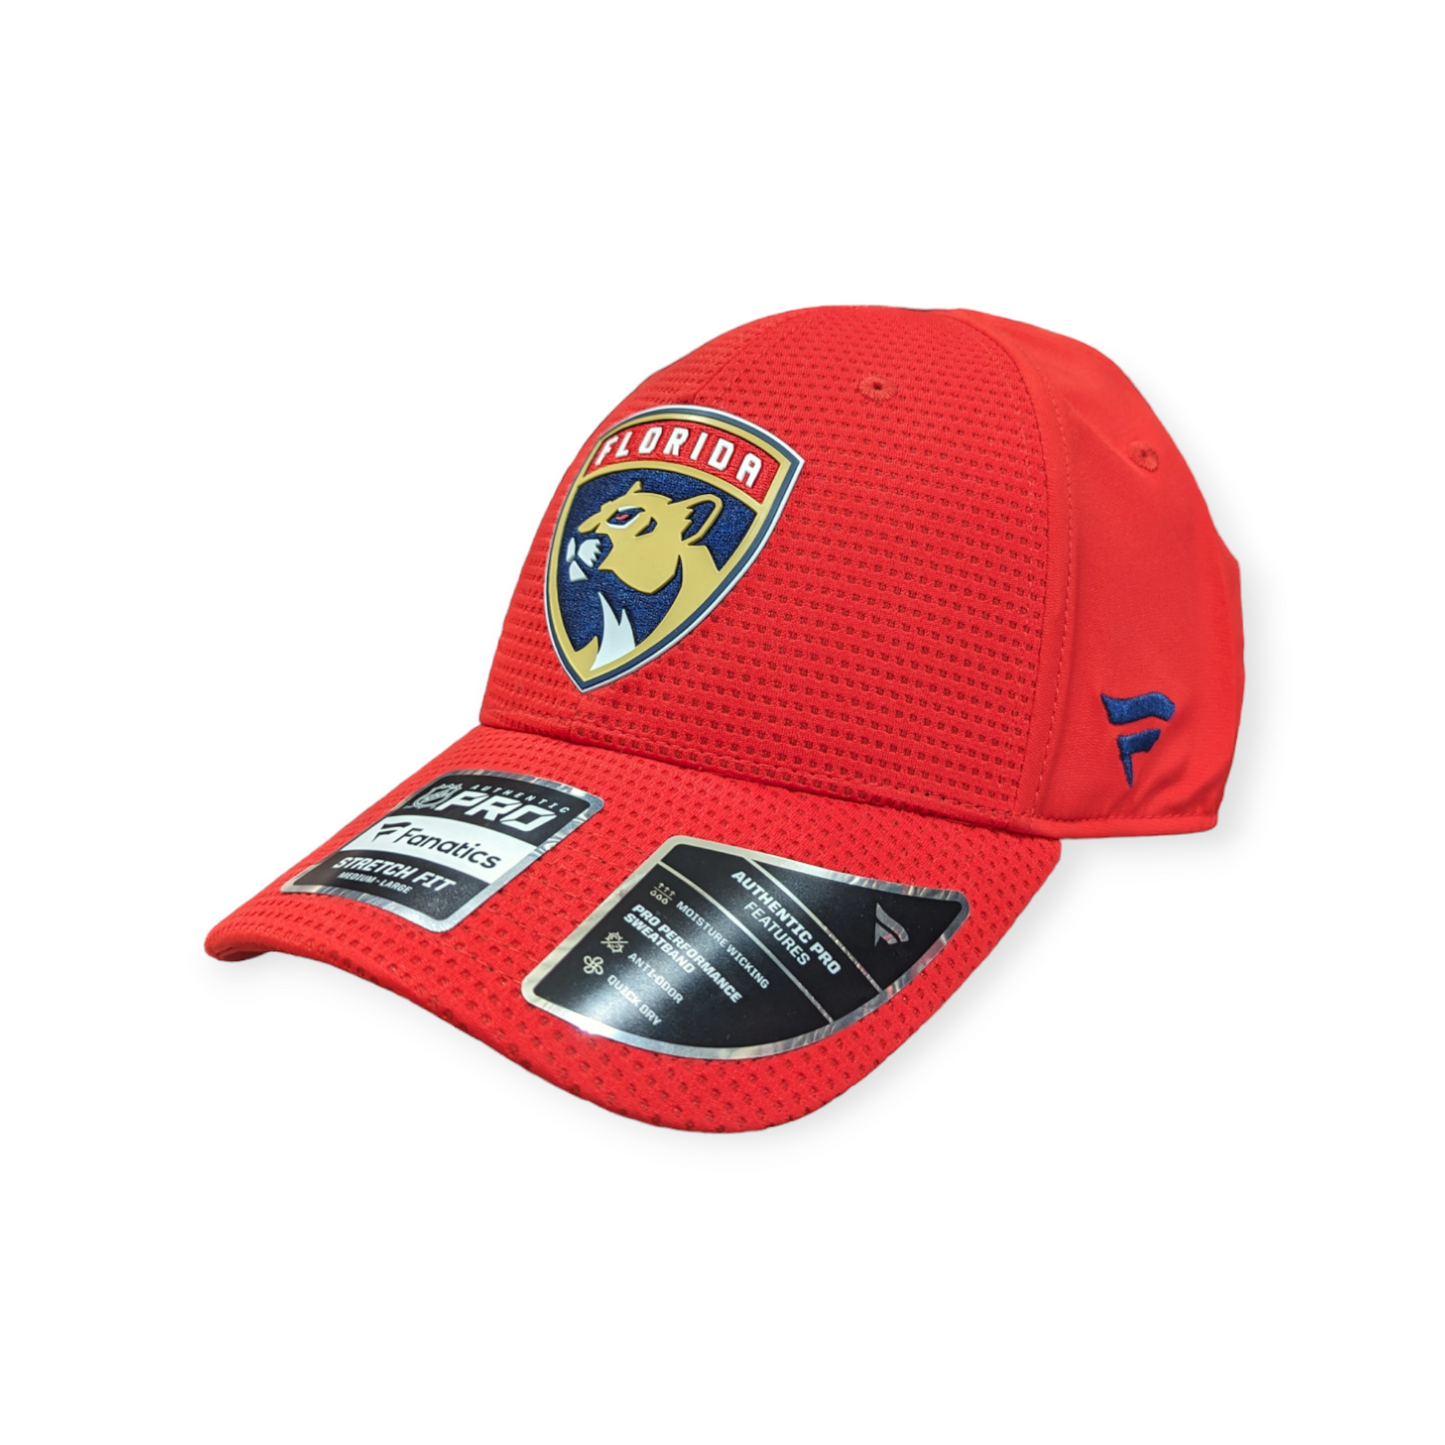 Men's Florida Panthers Red NHL Authentic Pro Rinkside Speed Flex Hat